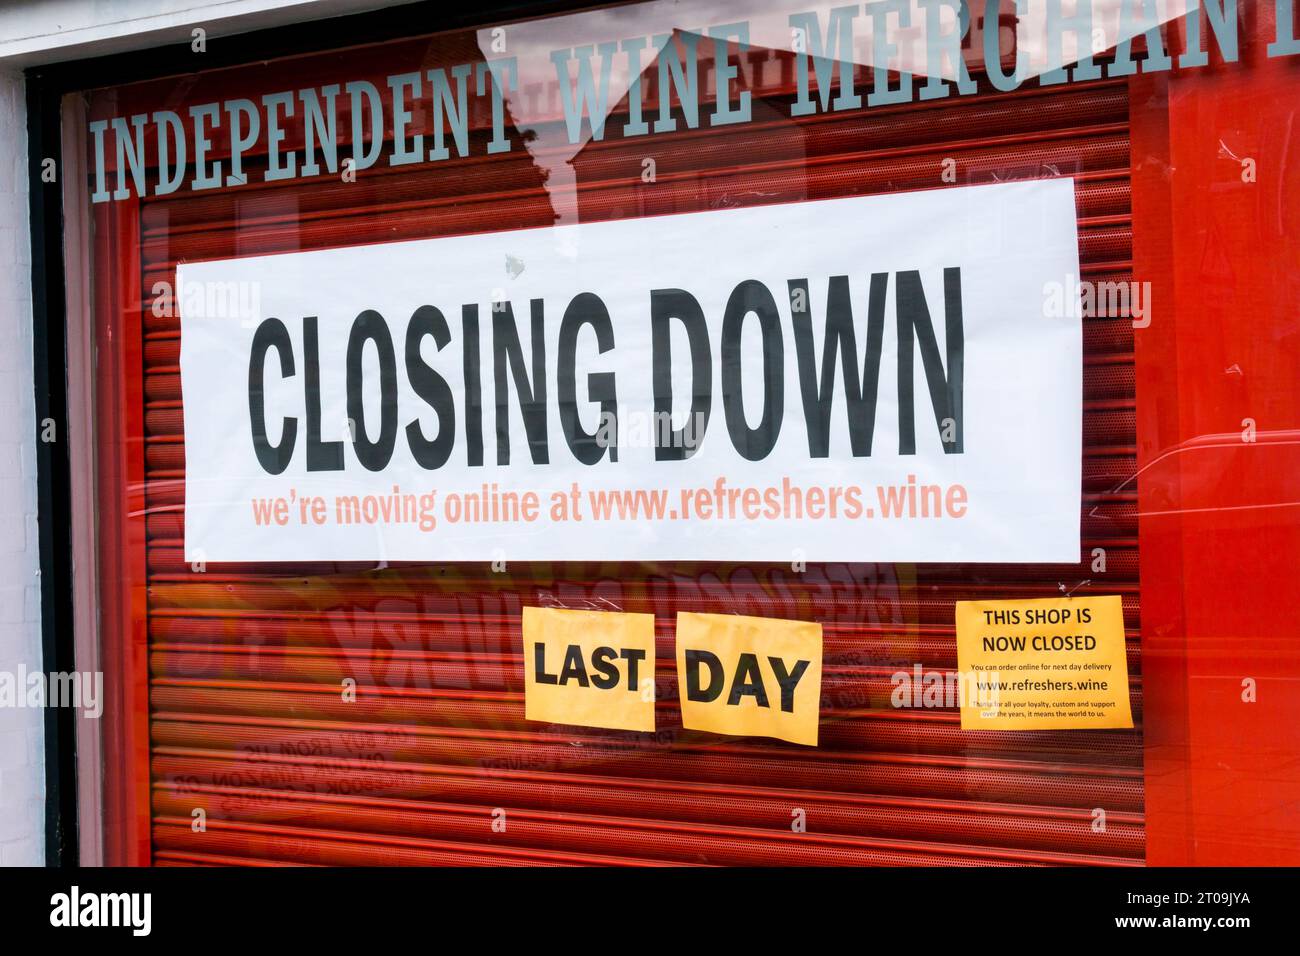 A sign on Refreshers off licence in Shortlands, South London, says that they are closing & moving the business online. Stock Photo